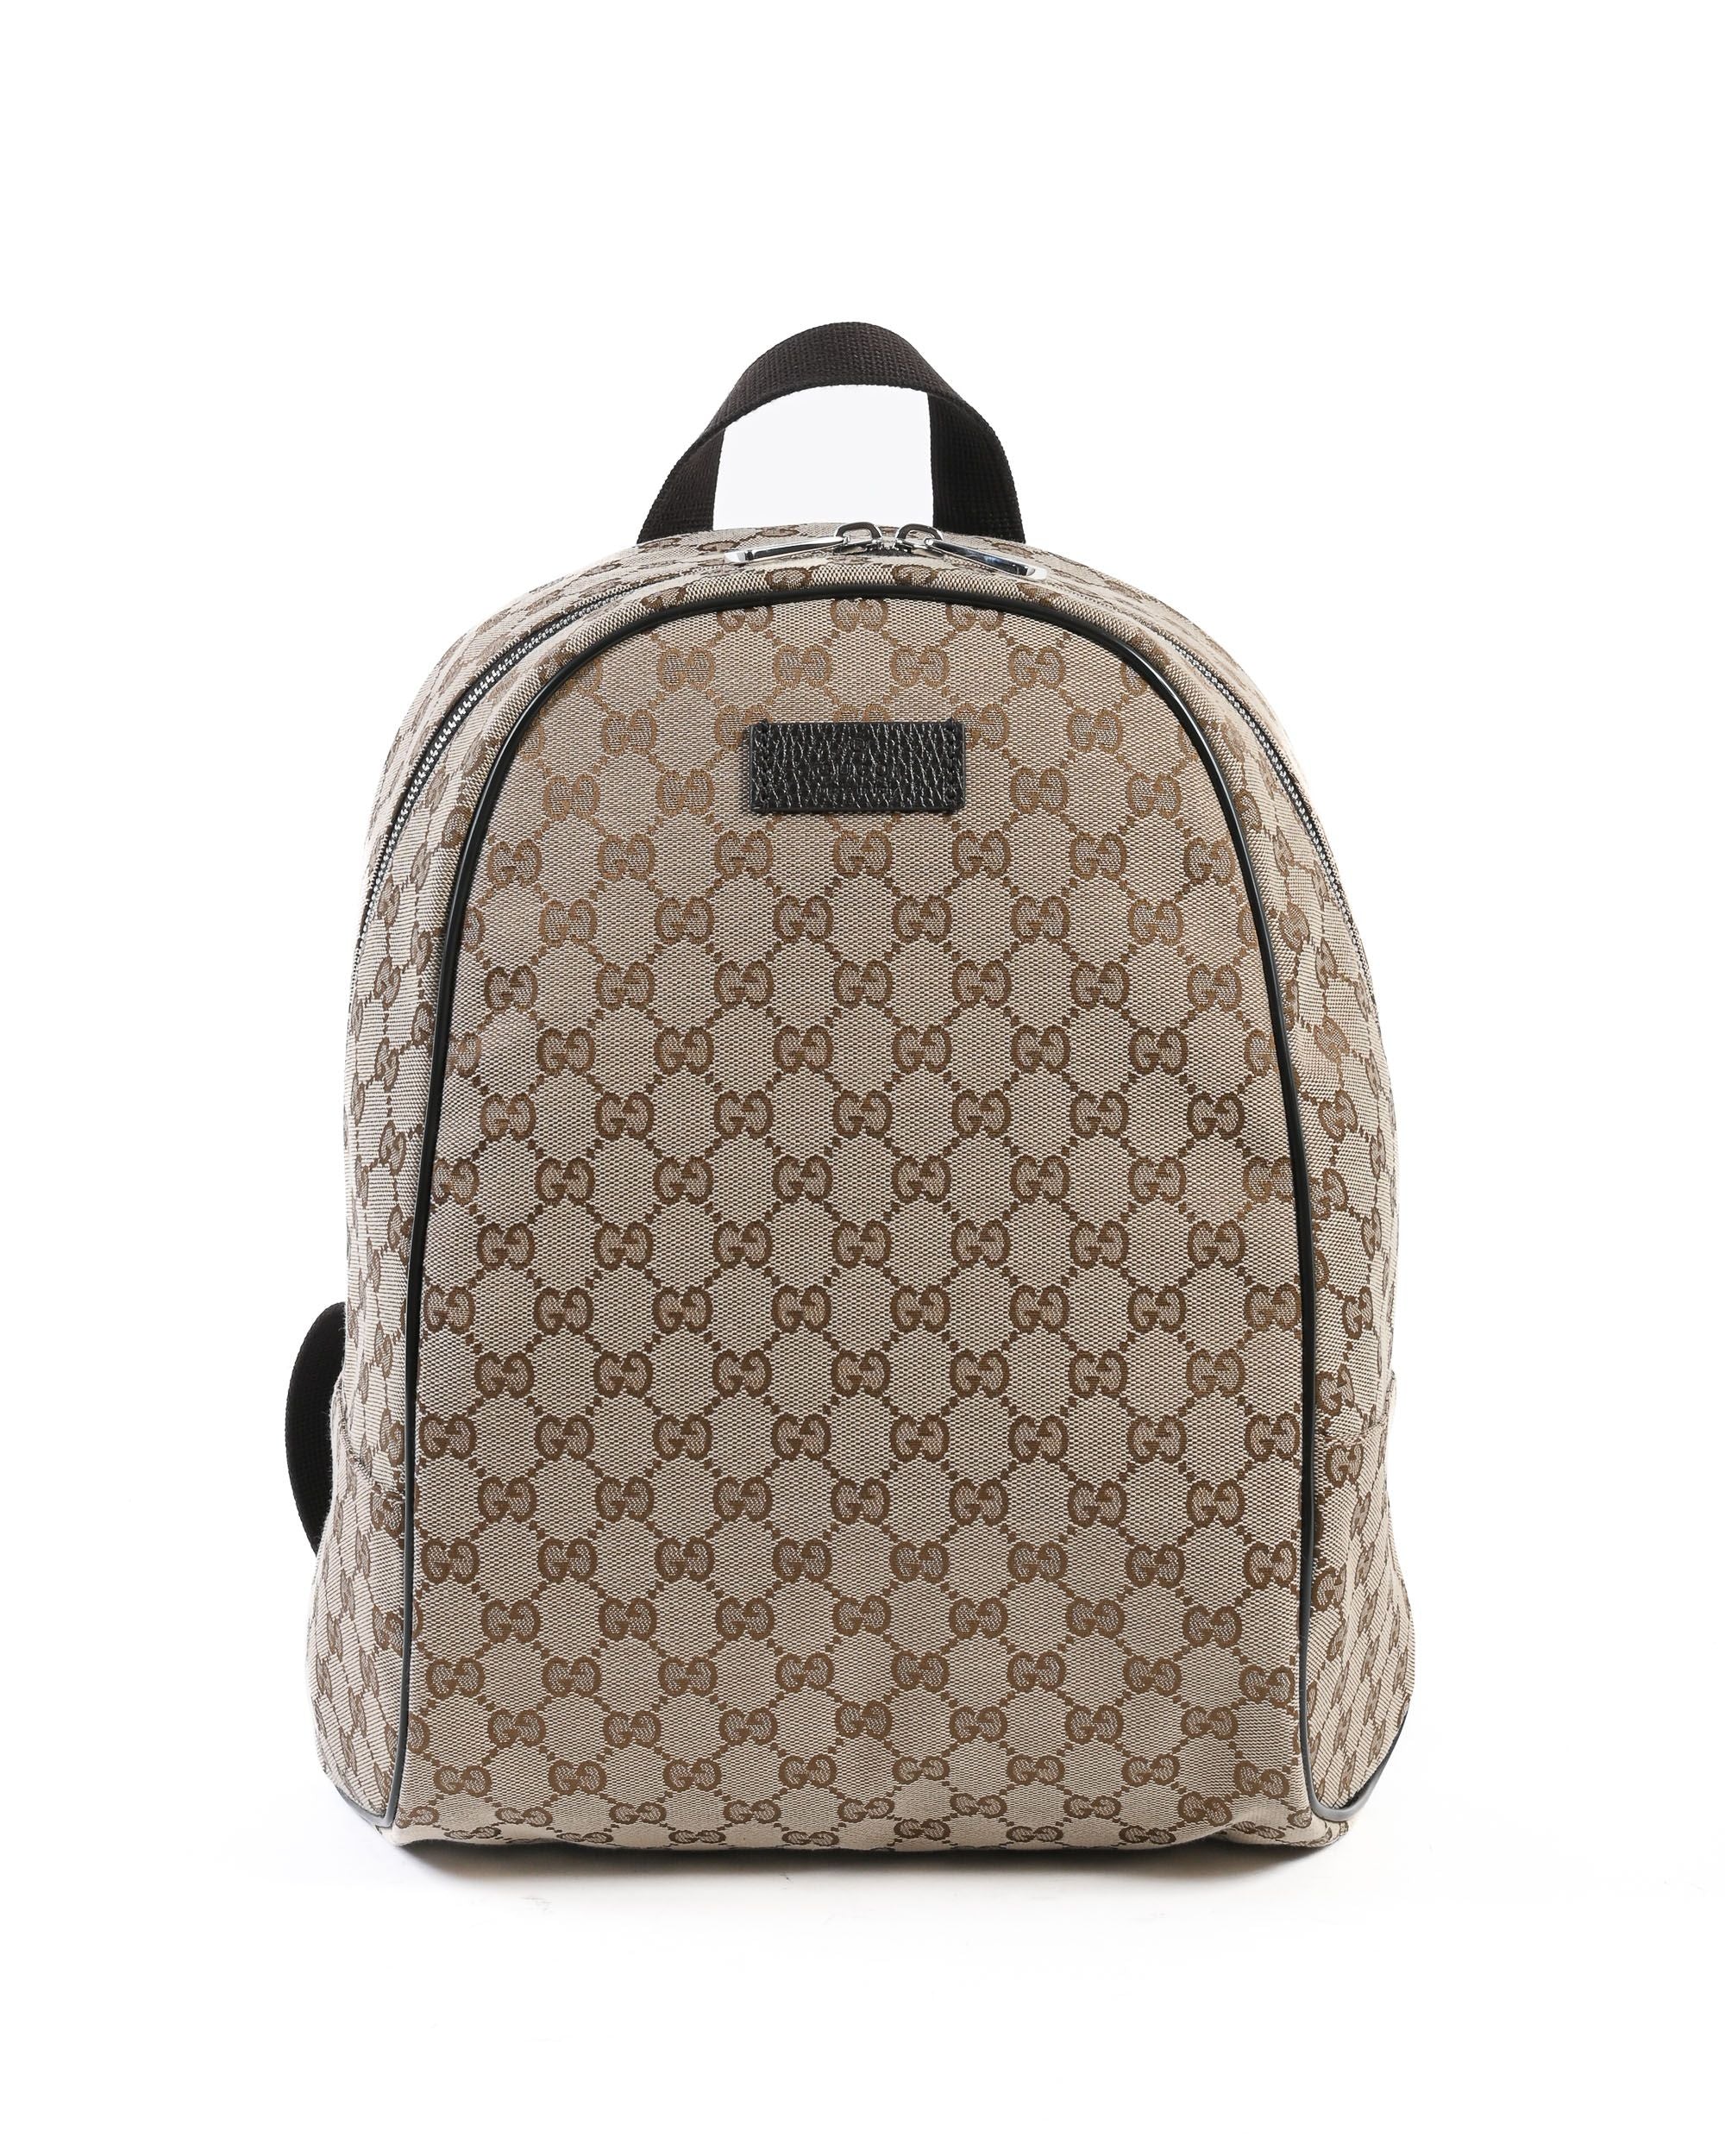 Gucci Logo Leather Logo Canvas Schoolbag Backpack Unisex / / Brown Classic 449906-KY9NN-9873